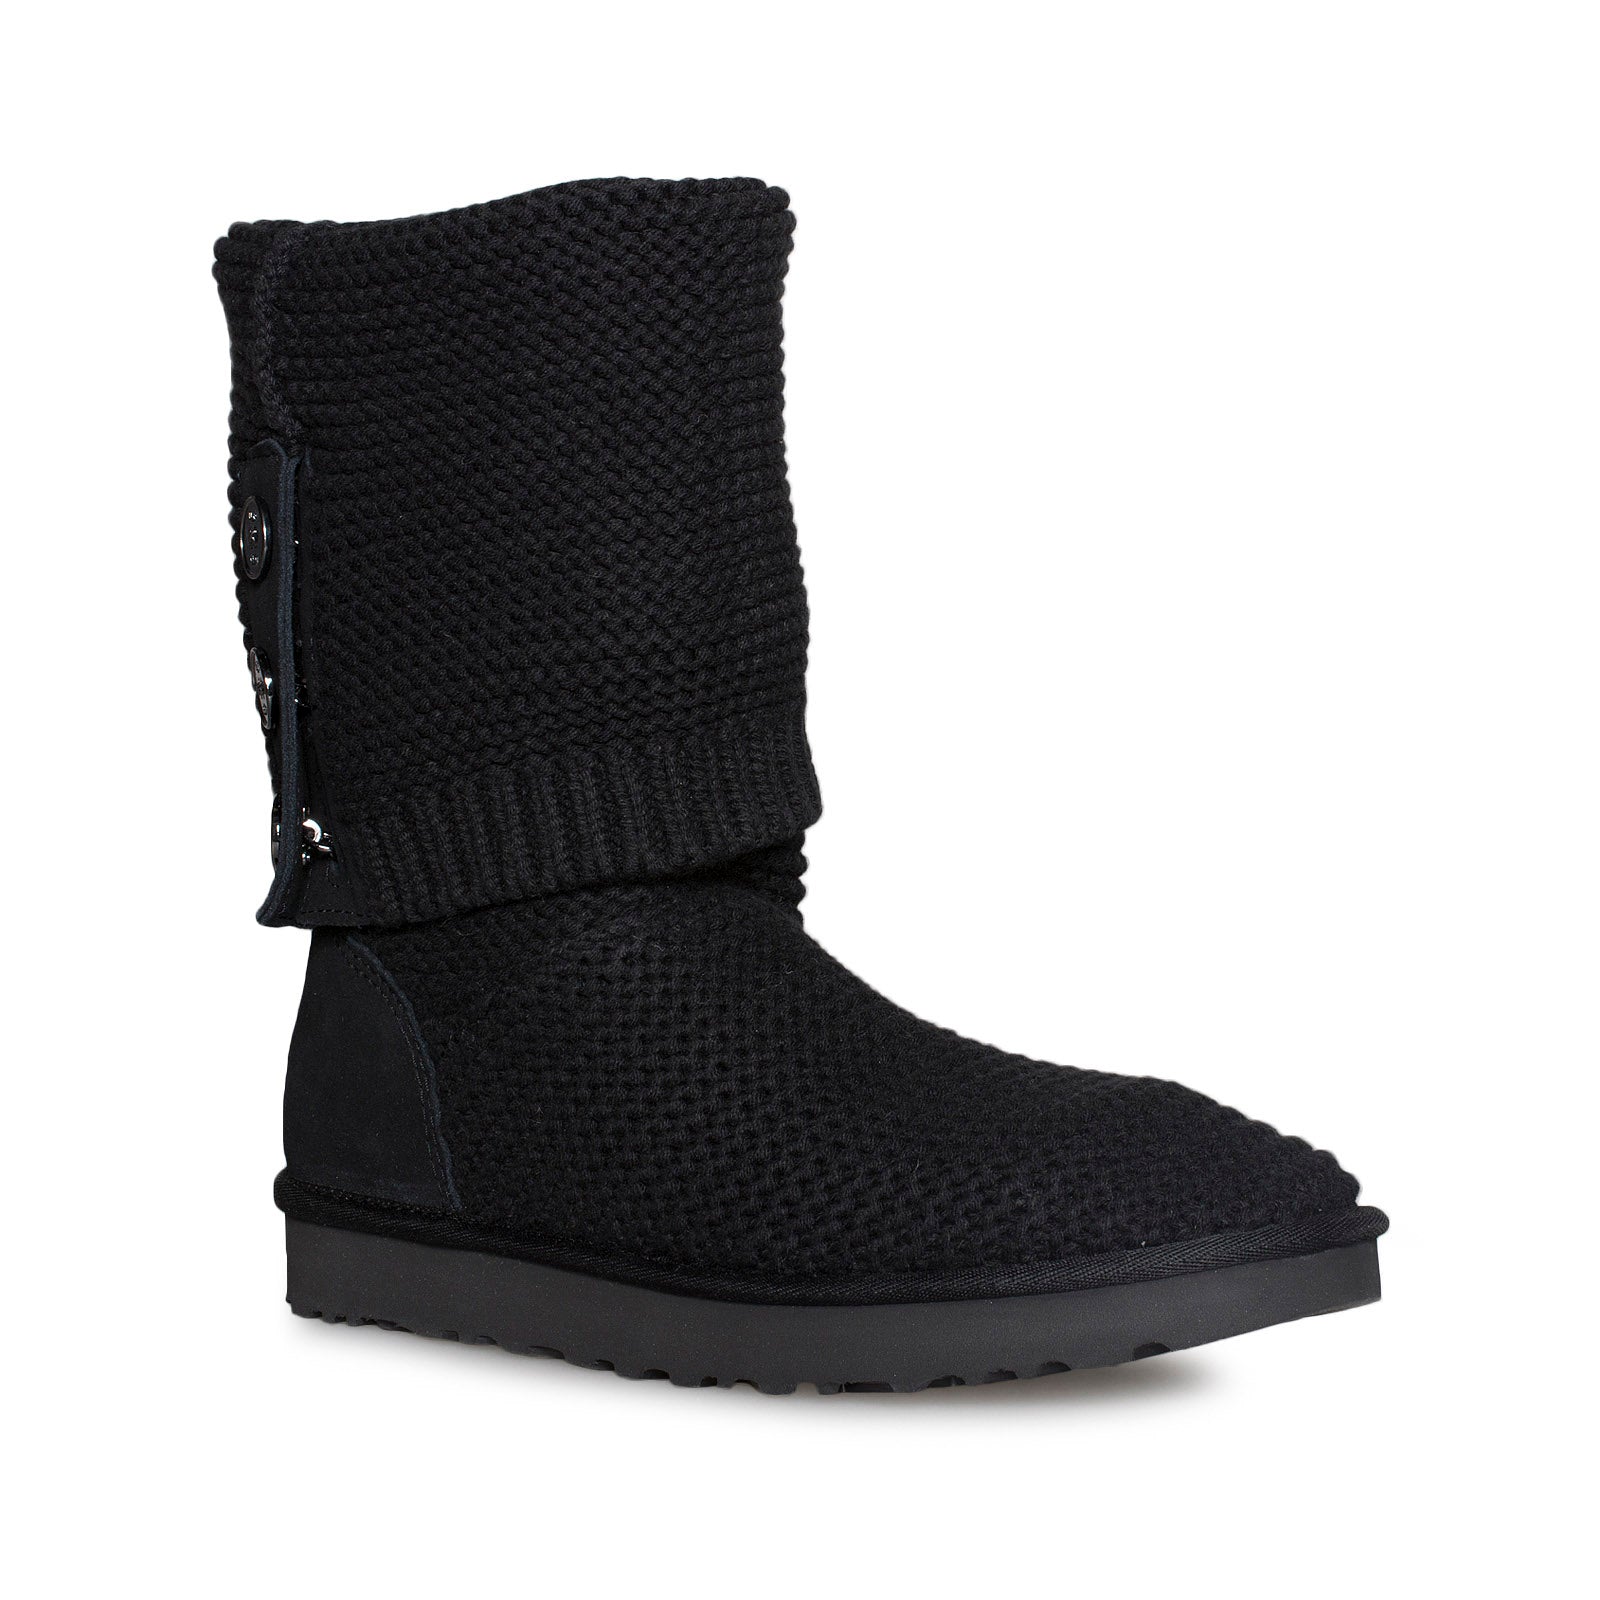 ugg black purl cardy knit boots